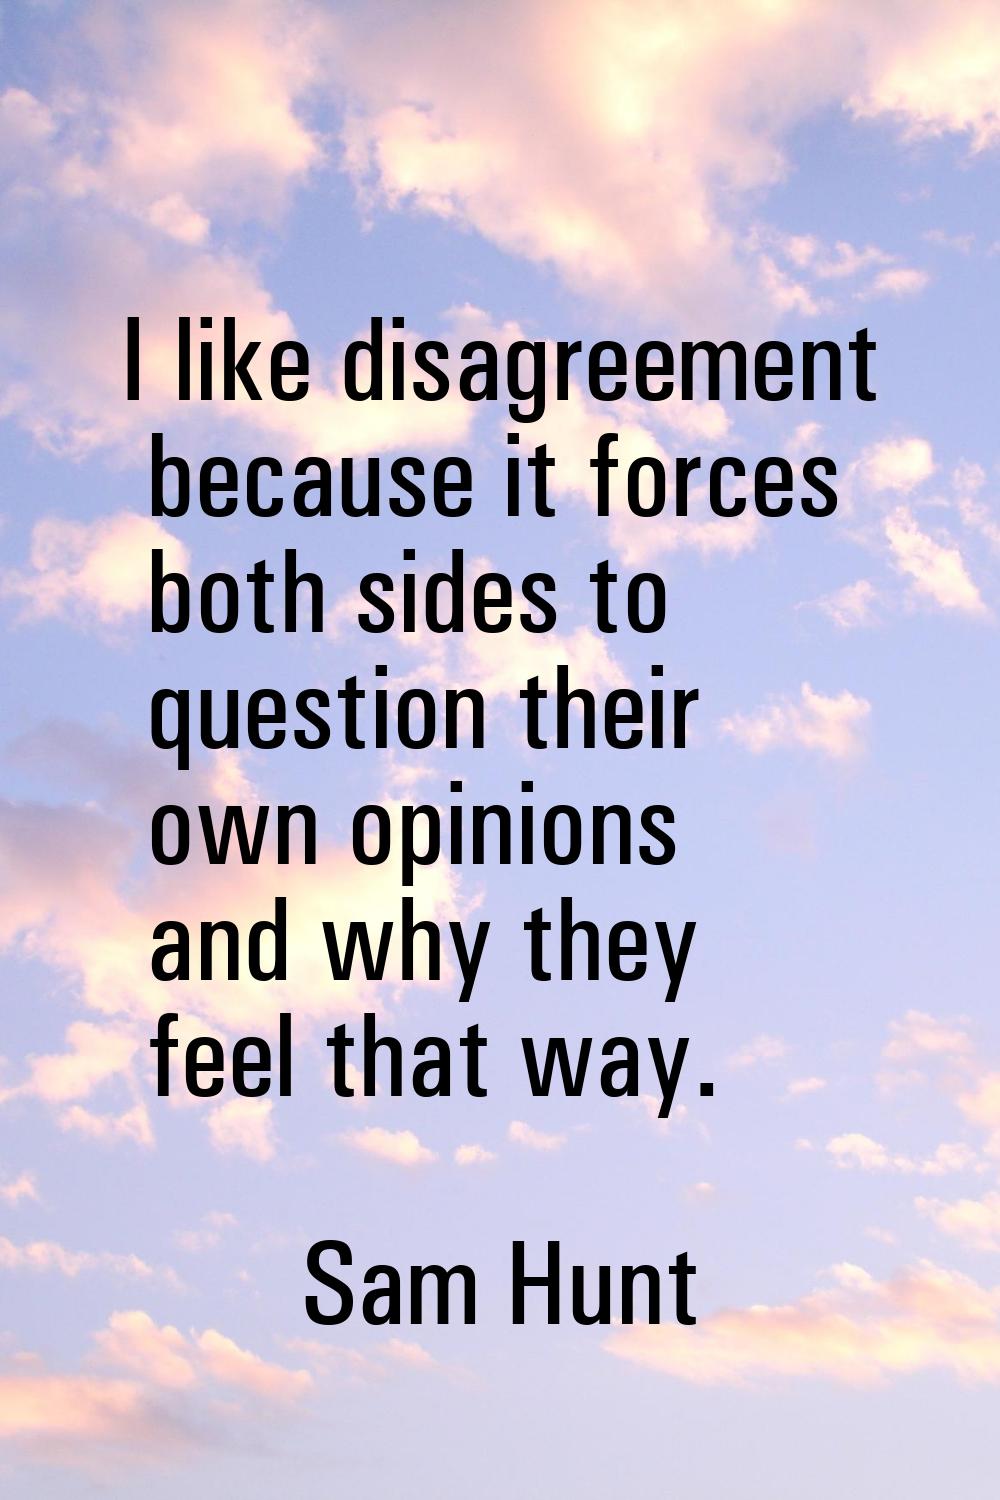 I like disagreement because it forces both sides to question their own opinions and why they feel t